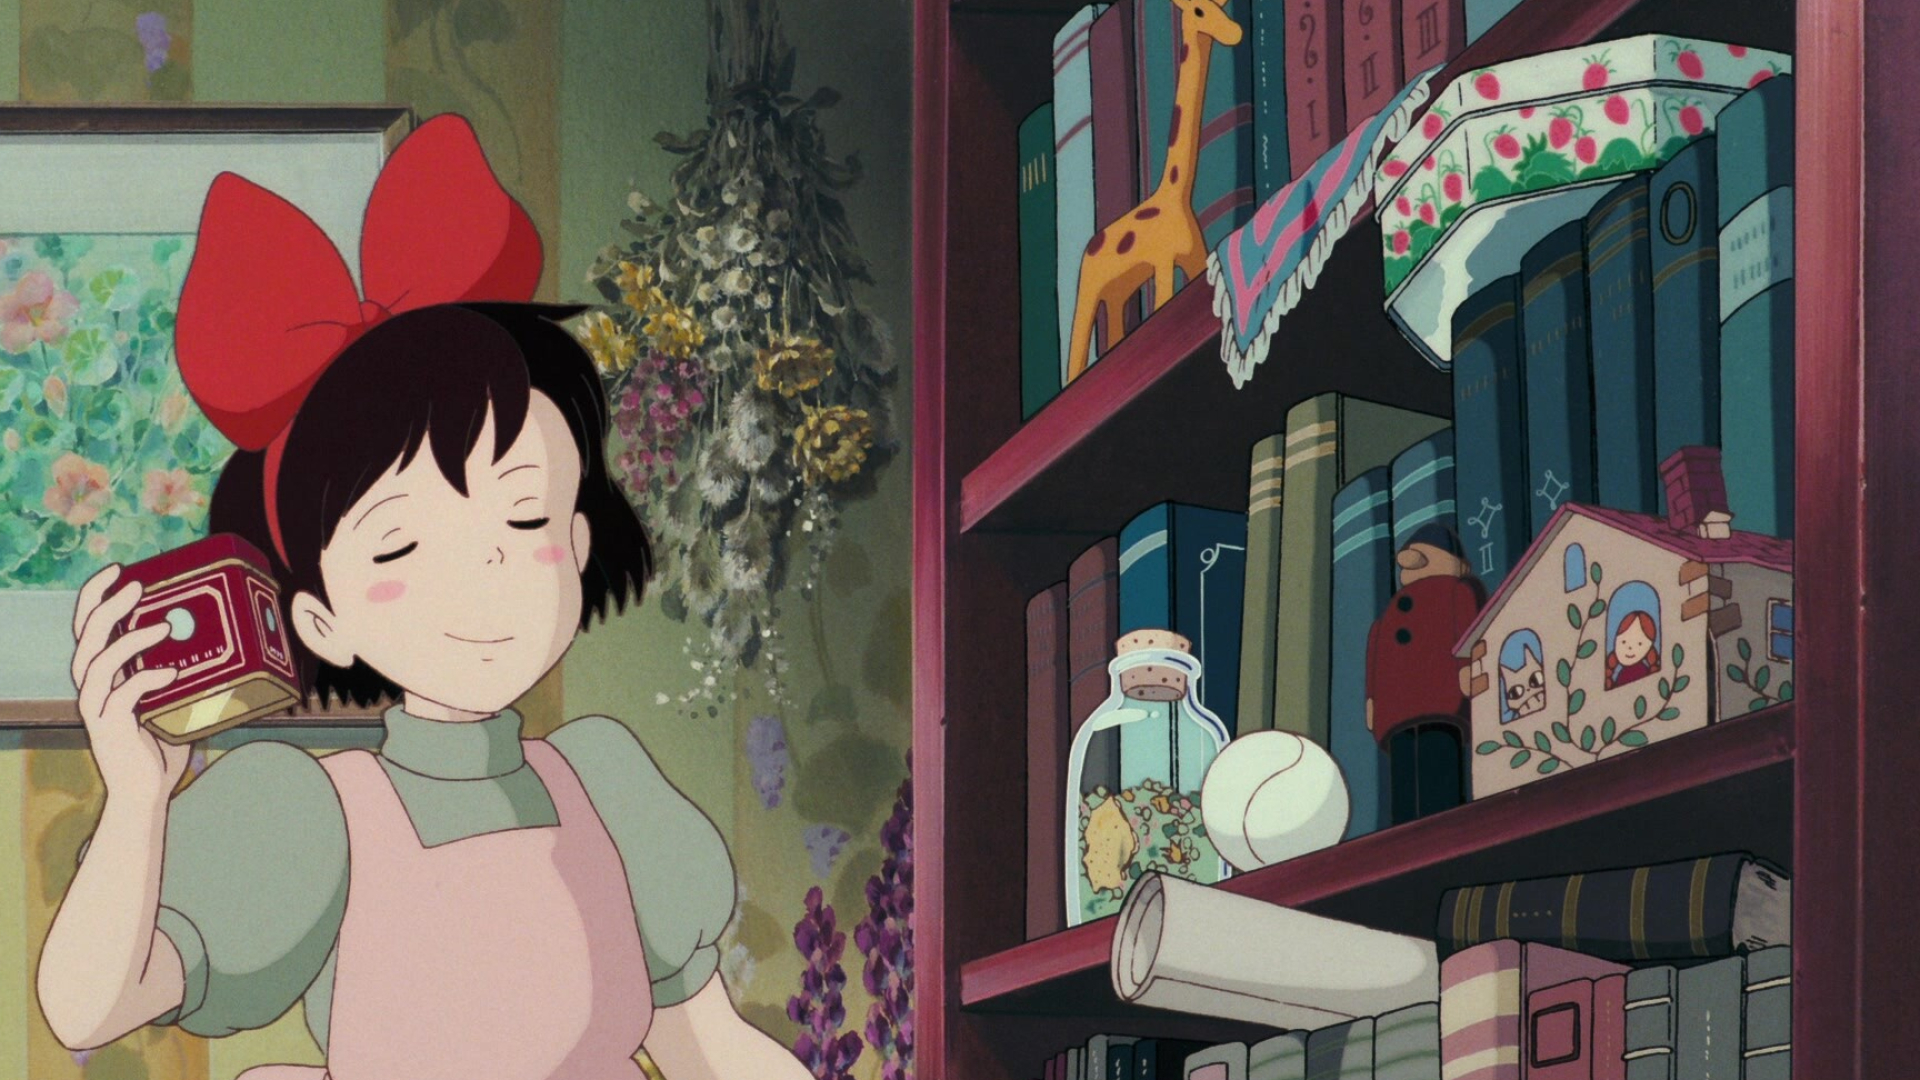 Kiki's Delivery Service: Kirsten Dunst voices the main protagonist in Disney's 1997 English dub. 1920x1080 Full HD Wallpaper.